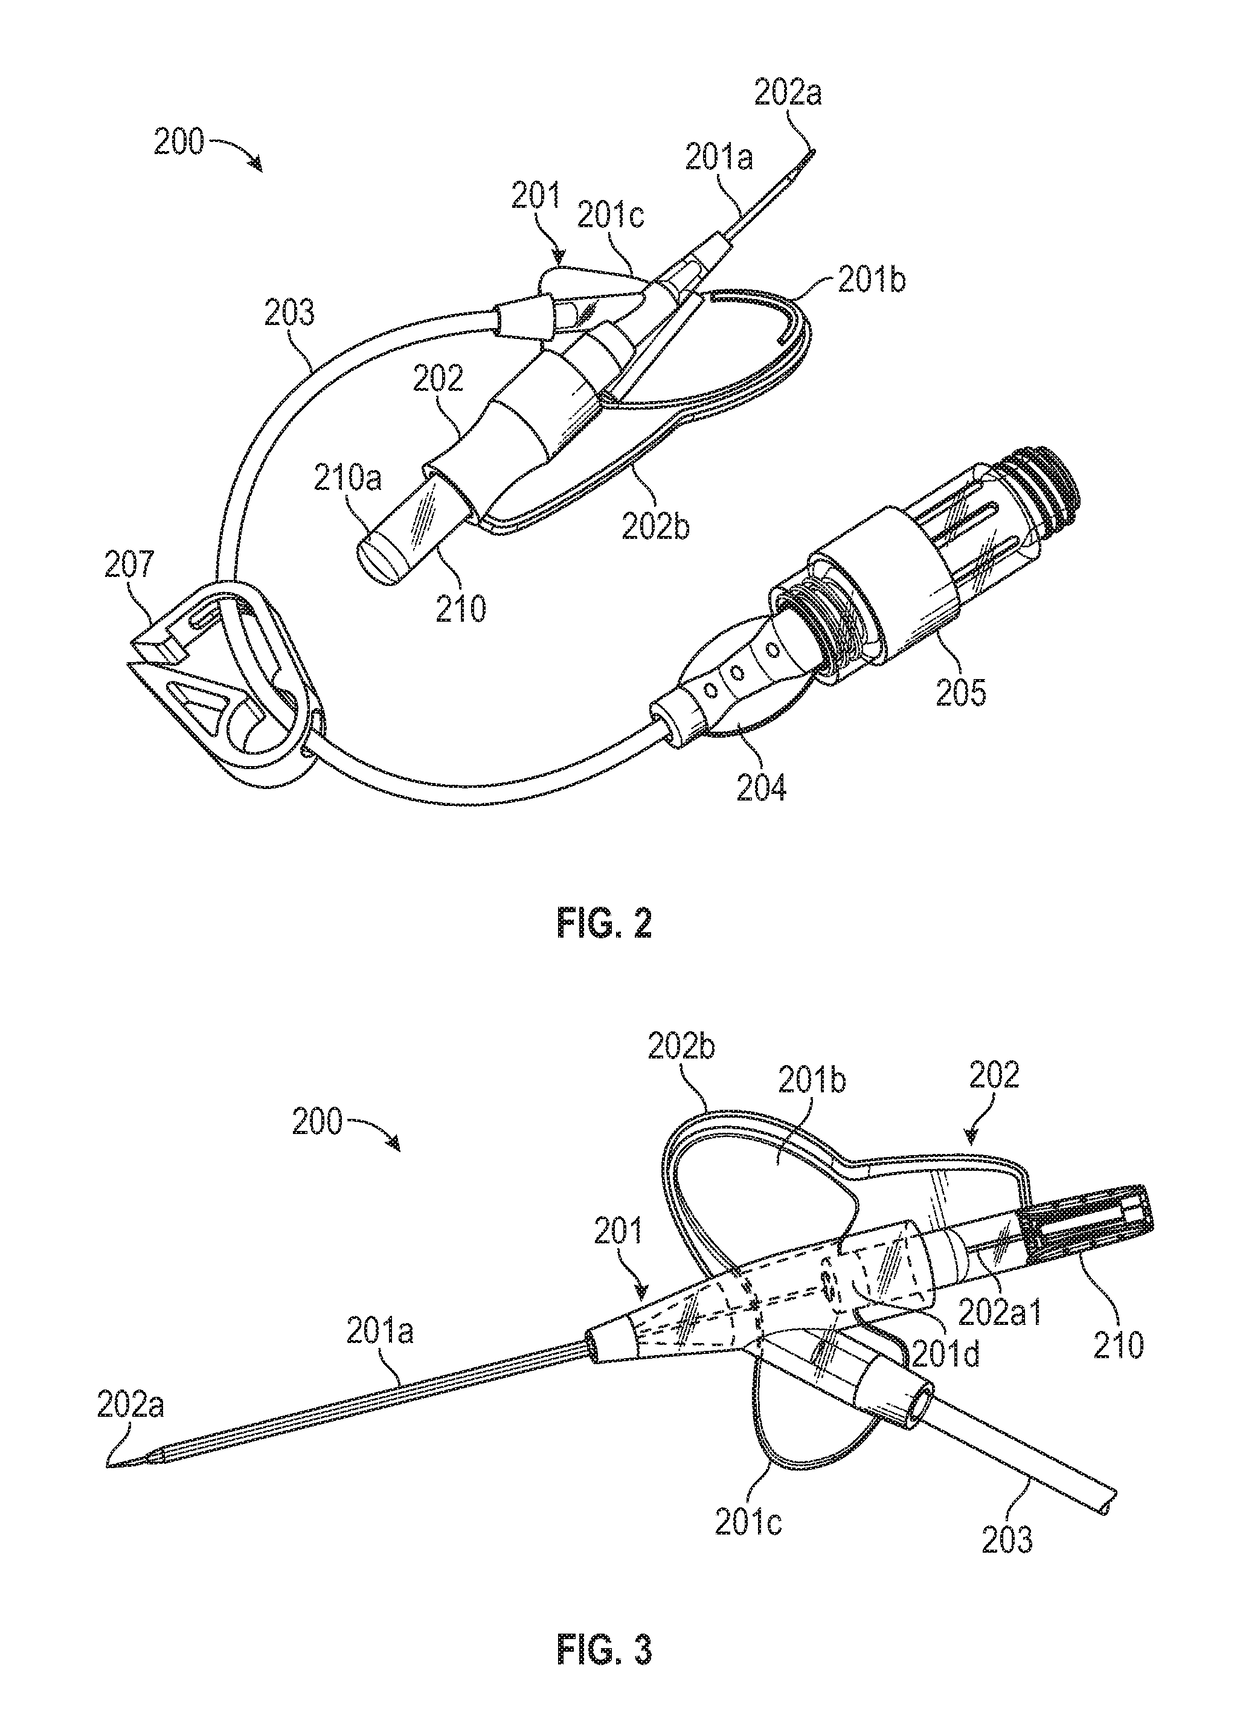 Closed iv access device with paddle grip needle hub and flash chamber